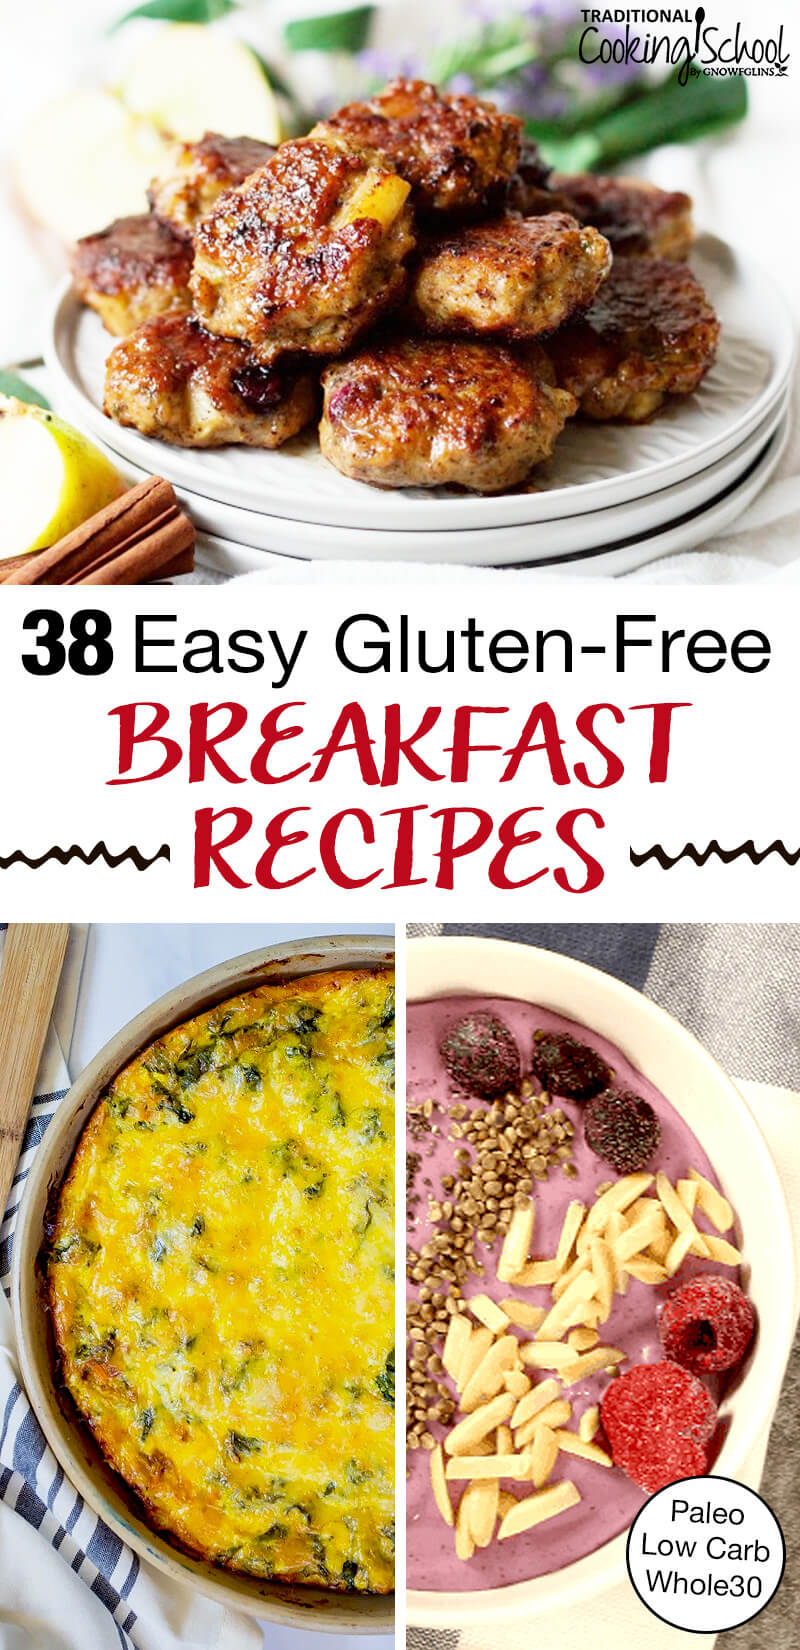 photo collage of easy breakfasts, including sausage patties, berry smoothie bowl, and crustless quiche, with text overlay: "38 Easy Gluten-Free Breakfast Recipes (Paleo, Low Carb, Whole30)